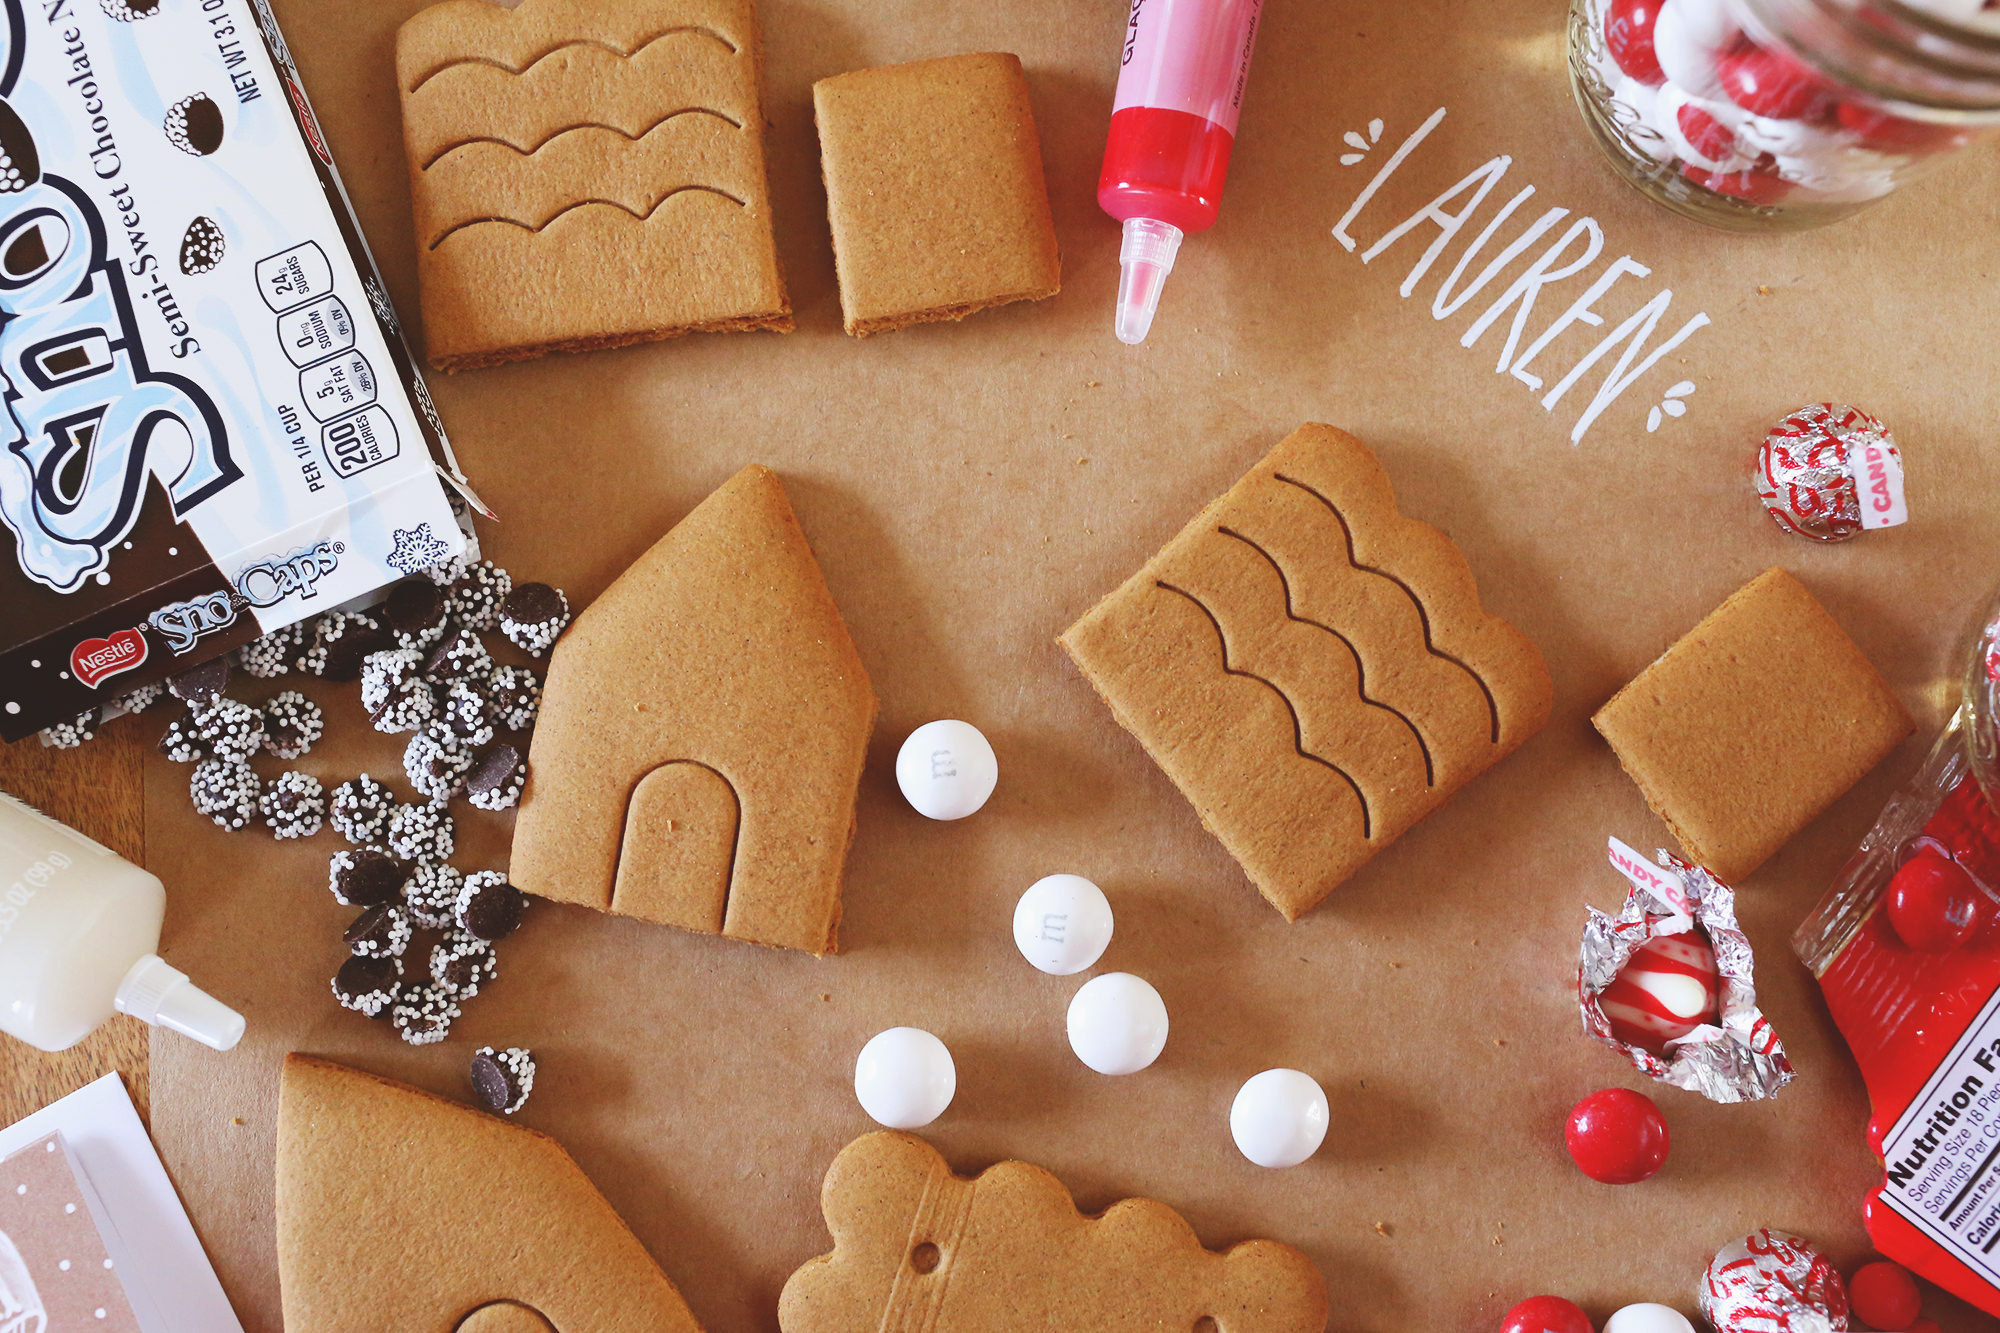 Thinking of hosting a gingerbread house party? Visit the blog for our three helpful tips!